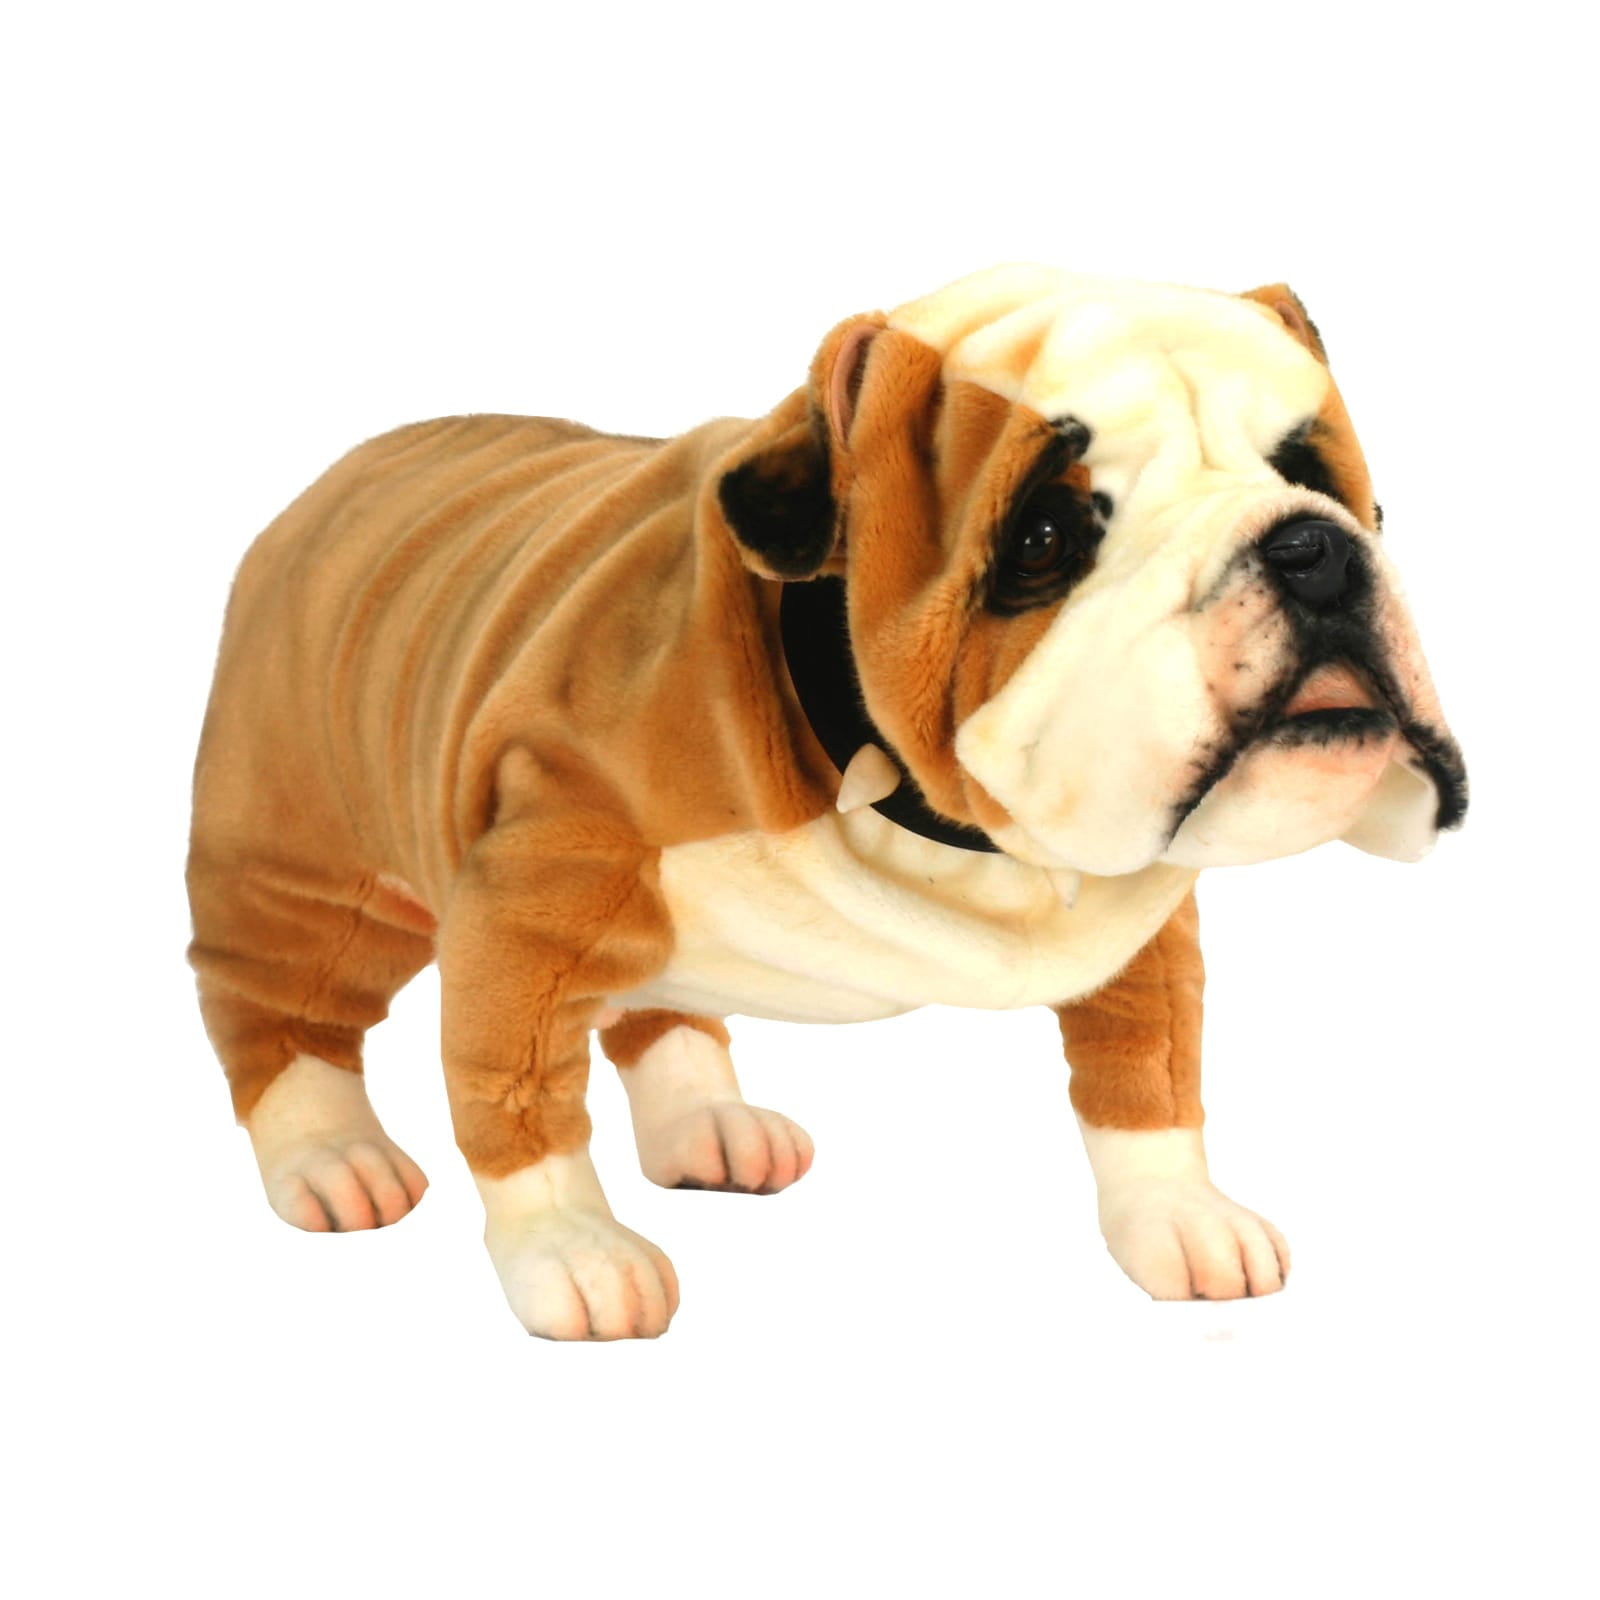 Hansa Standing Beige French Bulldog 6597 Soft Toy Dog Sold by Lincrafts Est 1993 